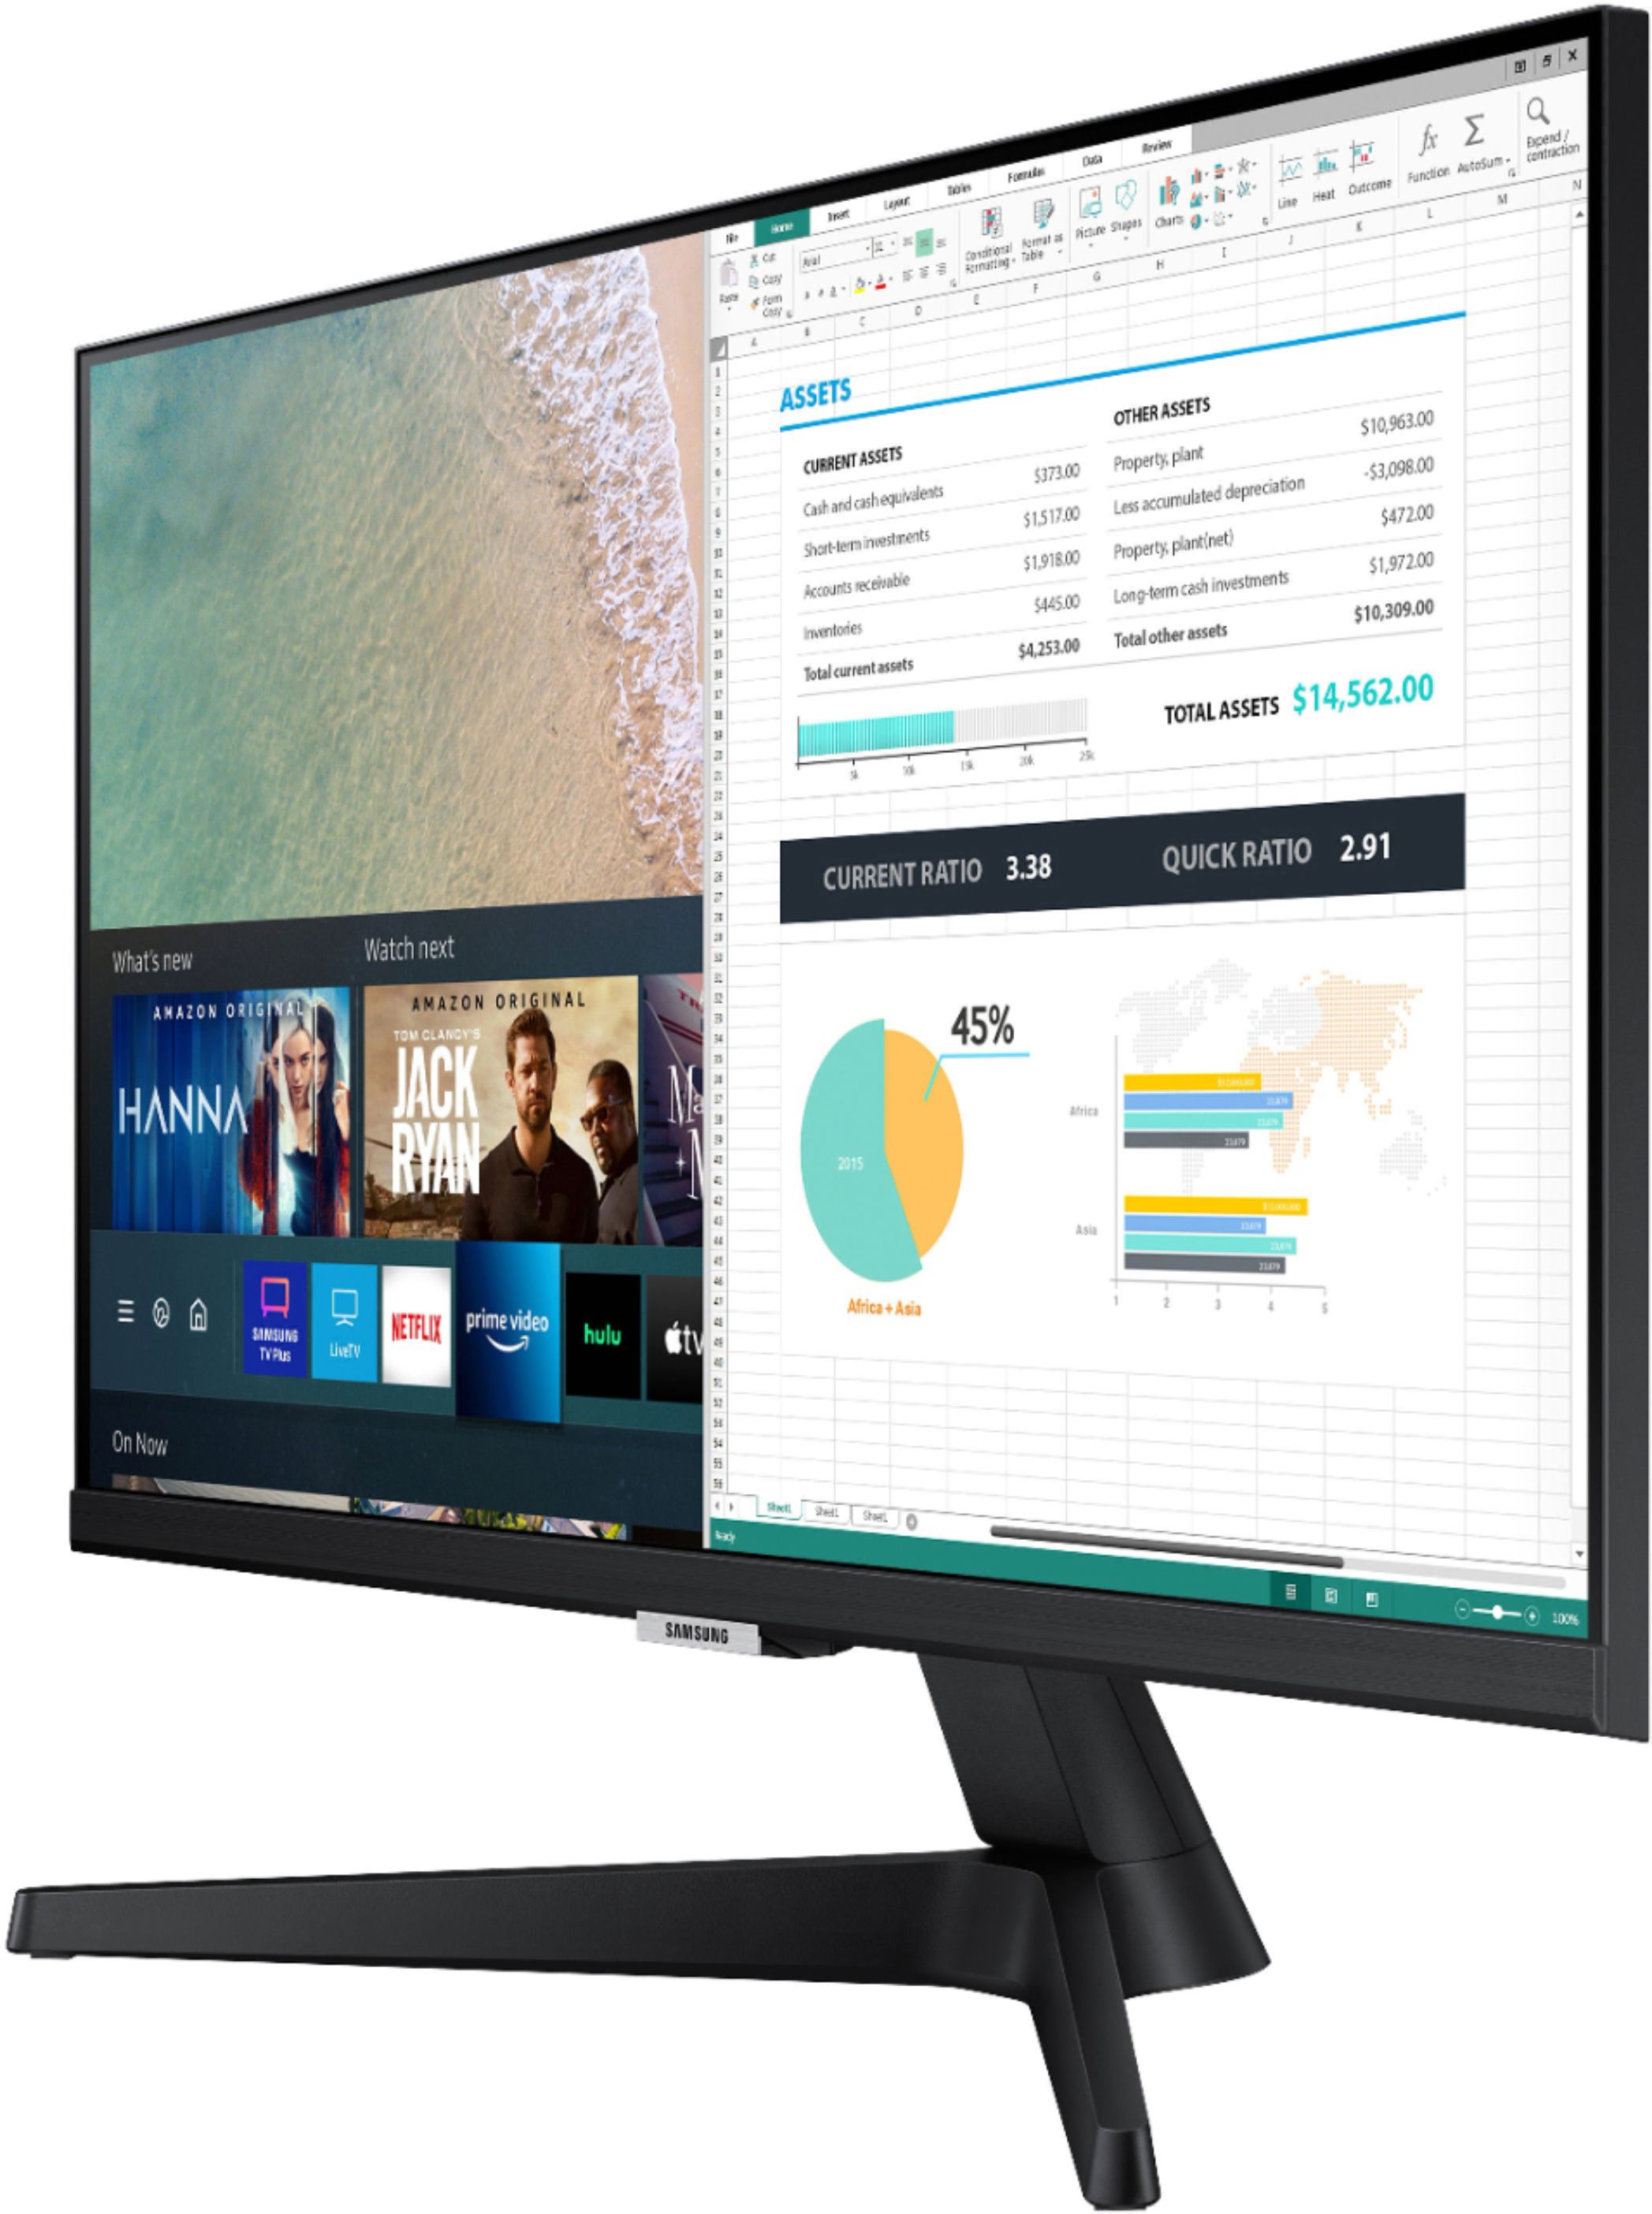 Samsung AM500 Series 24 IPS LED FHD Smart Tizen Monitor with Streaming TV  Black LS24AM506NNXZA - Best Buy